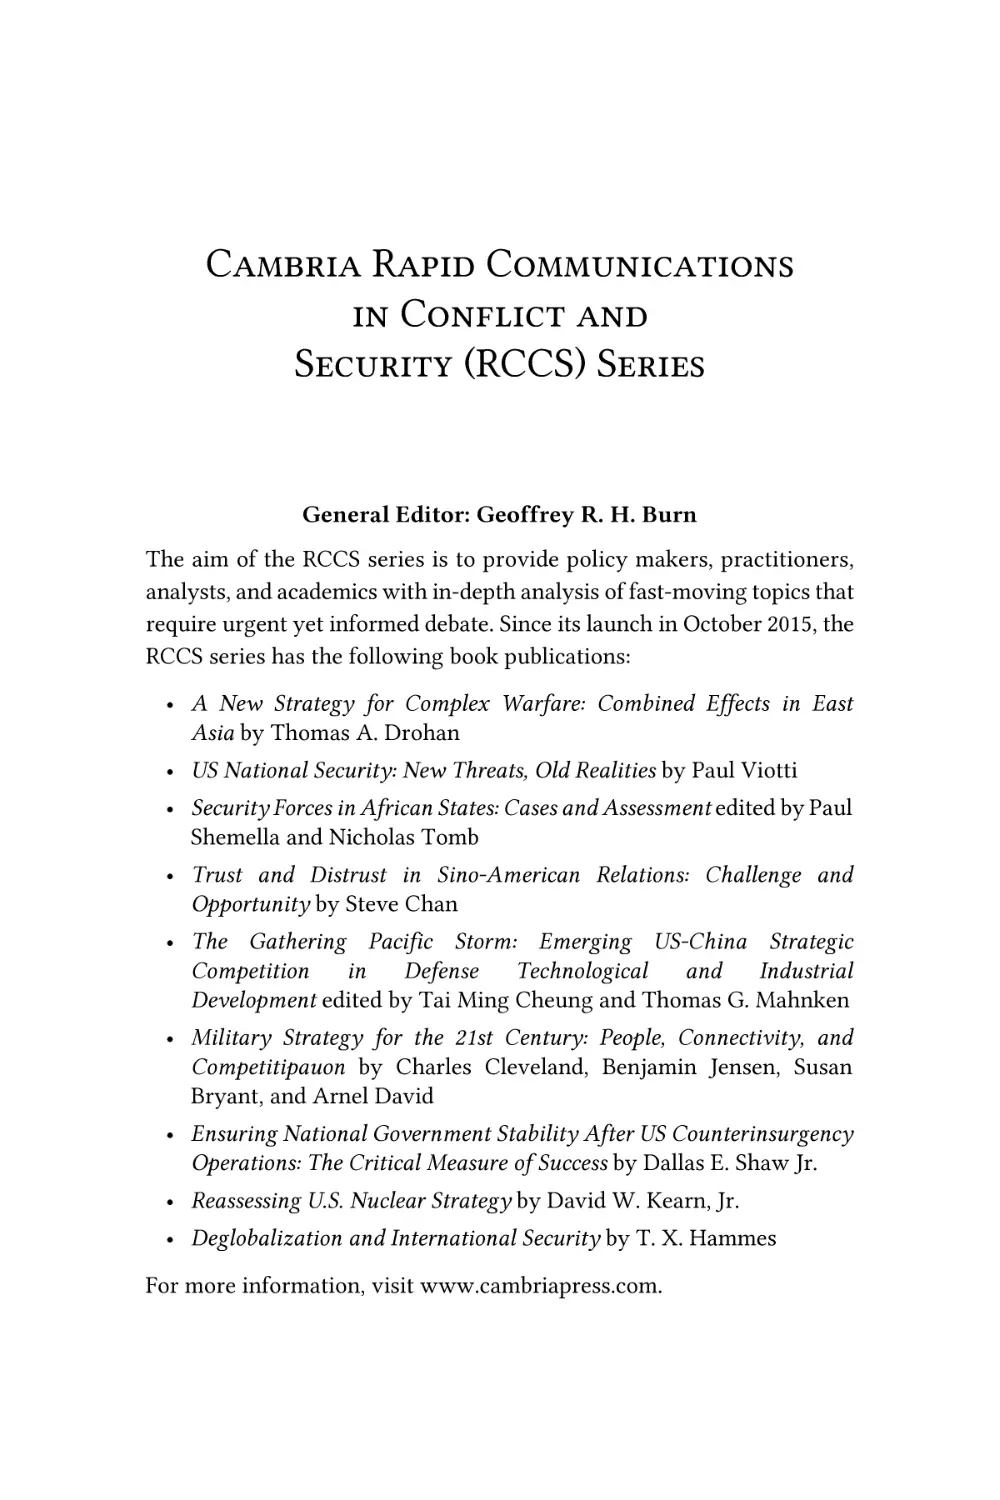 Cambria Rapid Communications in Conflict and Security (RCCS) Series